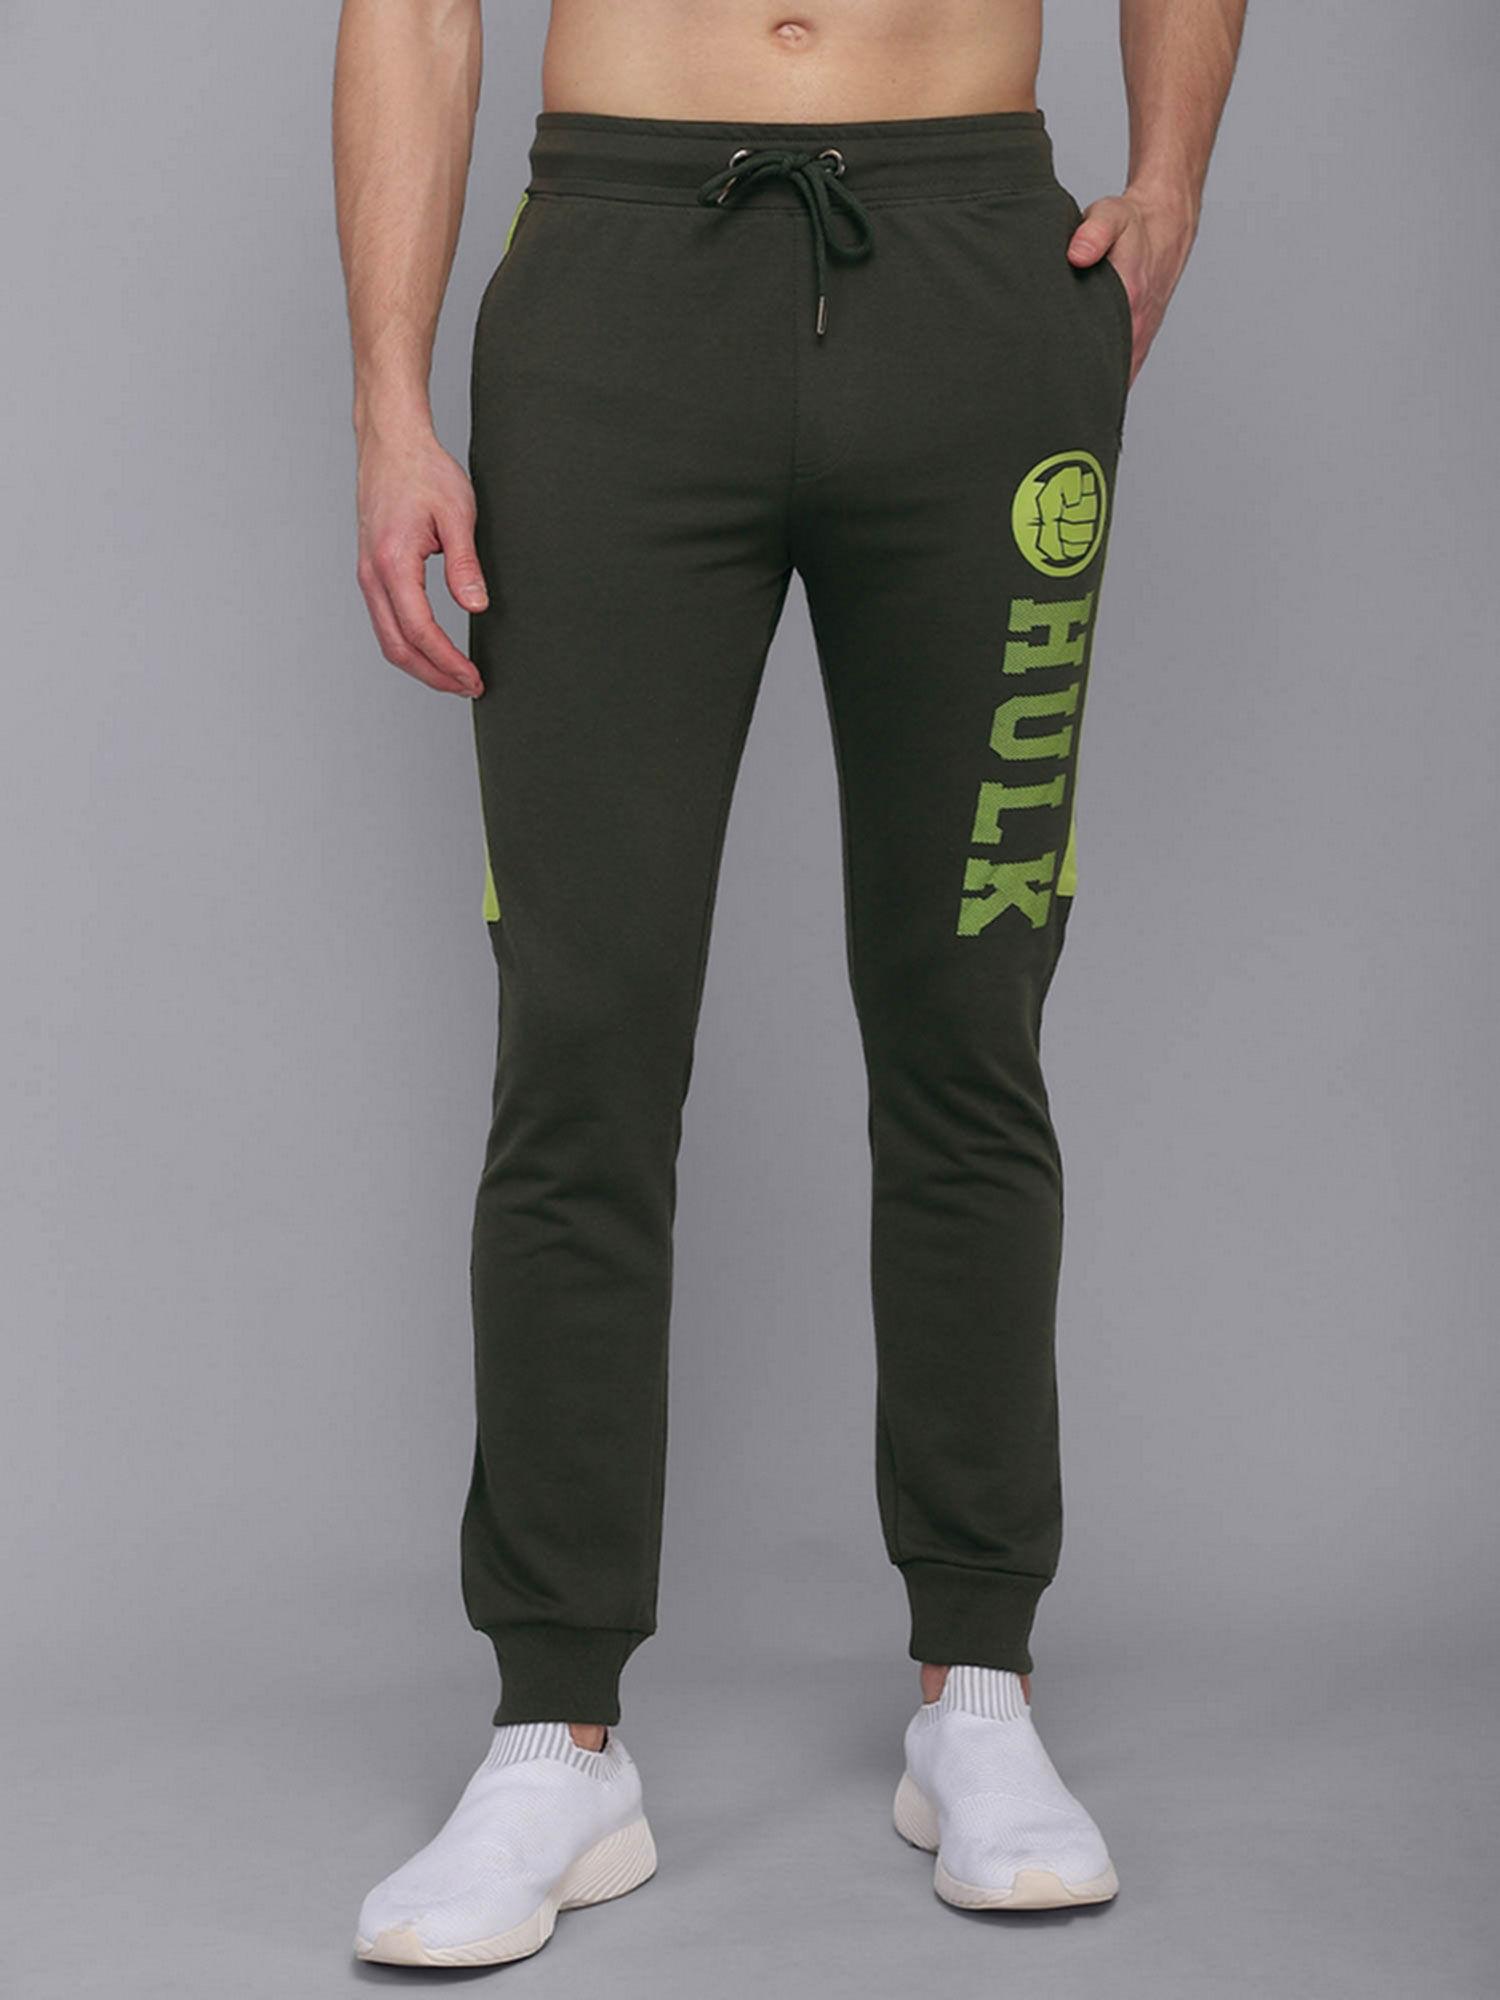 hulk featured joggers for men